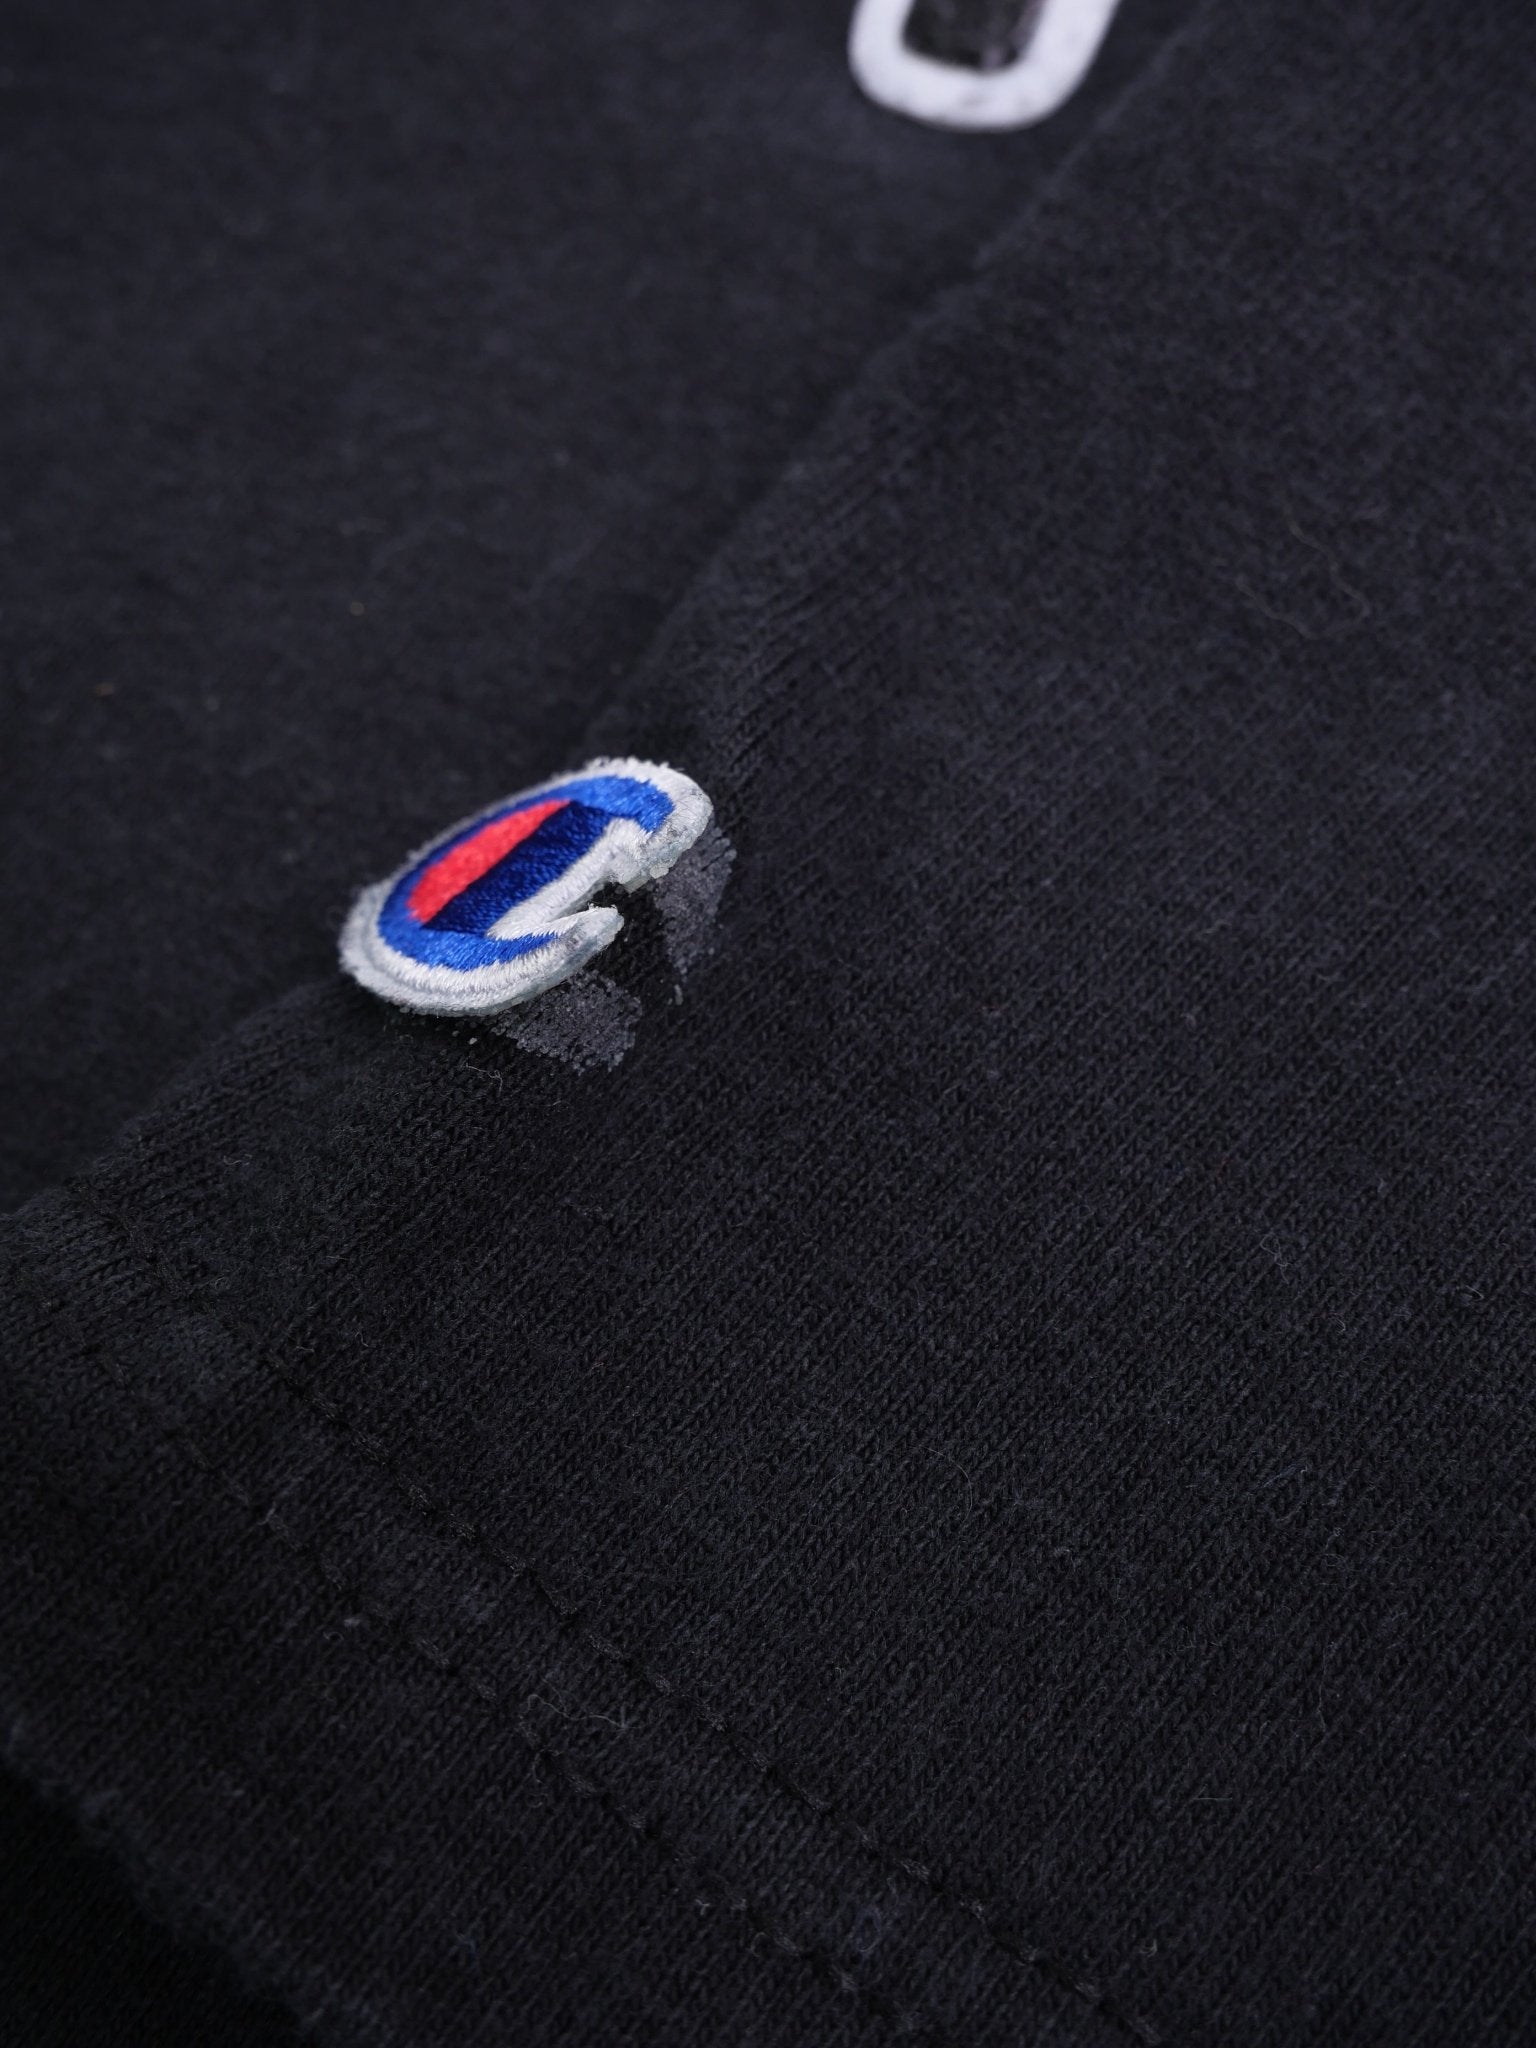 Champion embroidered Spellout Vintage Shirt - Peeces